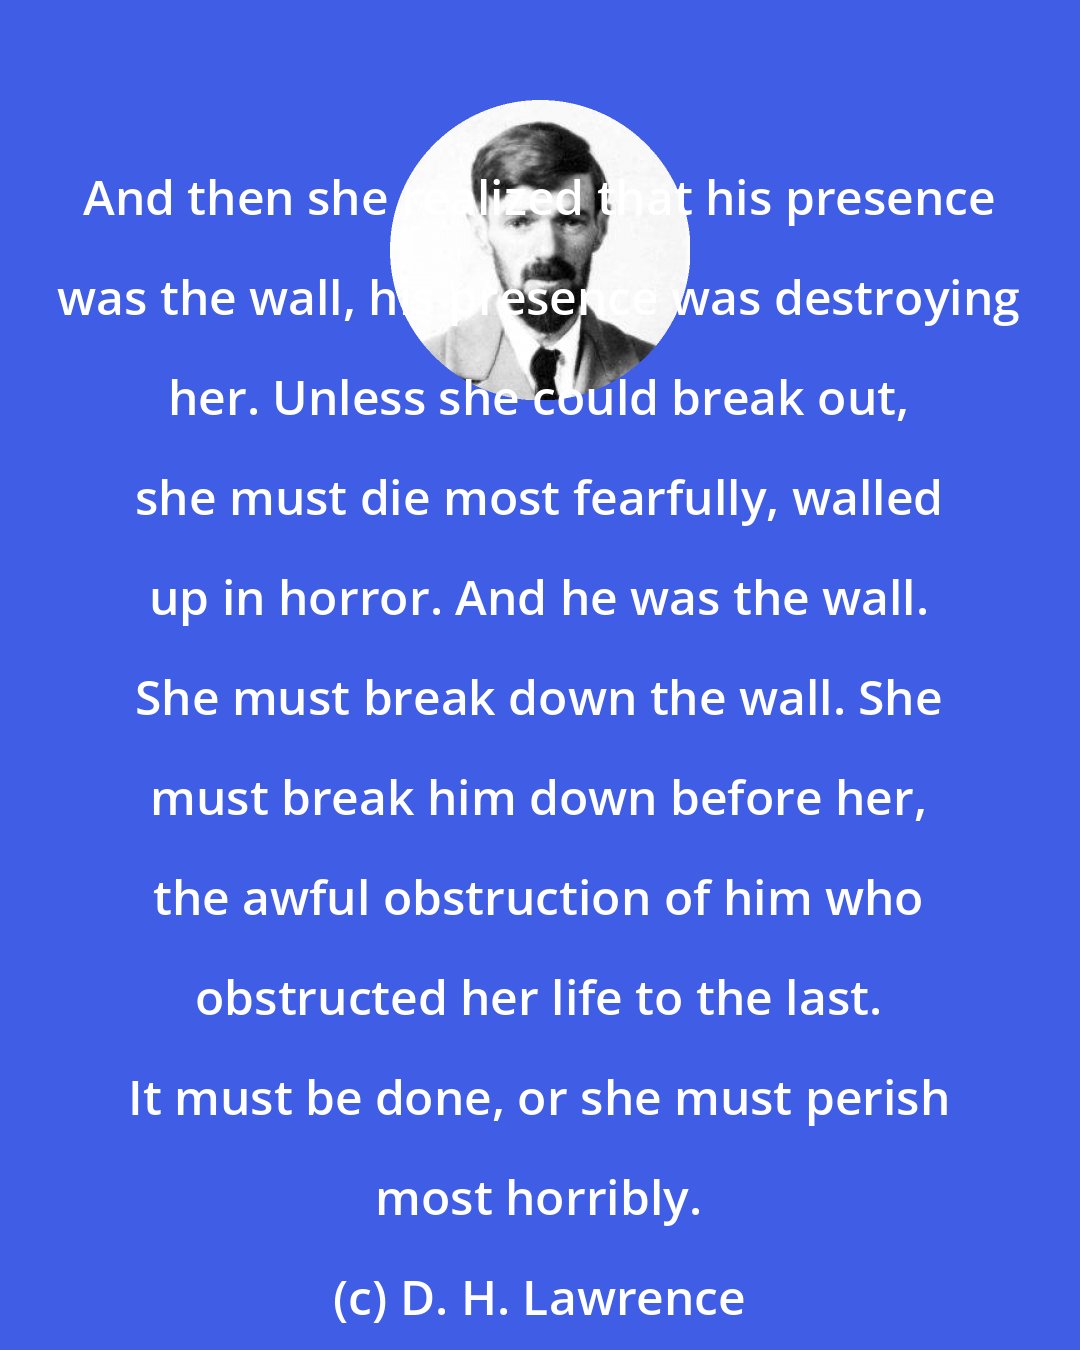 D. H. Lawrence: And then she realized that his presence was the wall, his presence was destroying her. Unless she could break out, she must die most fearfully, walled up in horror. And he was the wall. She must break down the wall. She must break him down before her, the awful obstruction of him who obstructed her life to the last. It must be done, or she must perish most horribly.